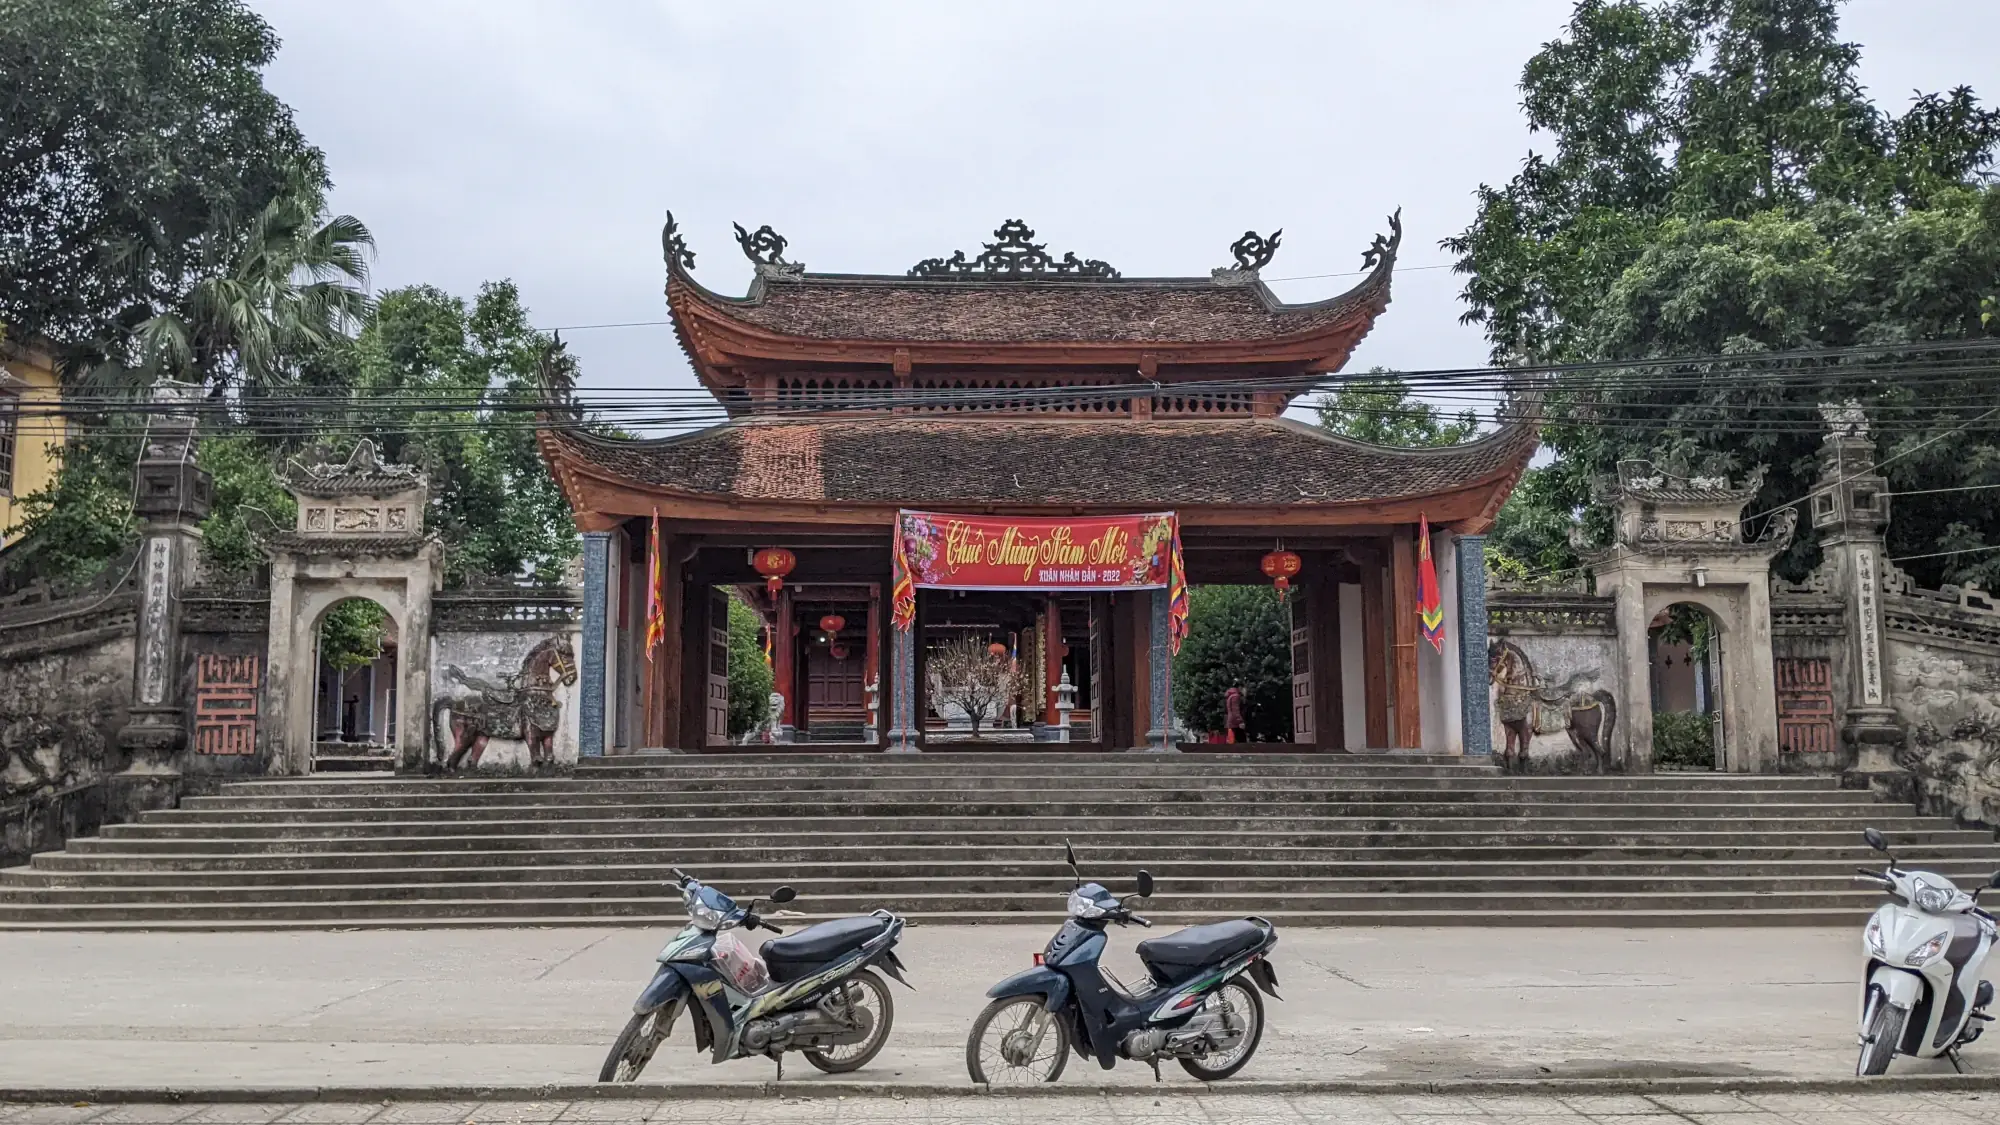 Visiting pagodas and temples